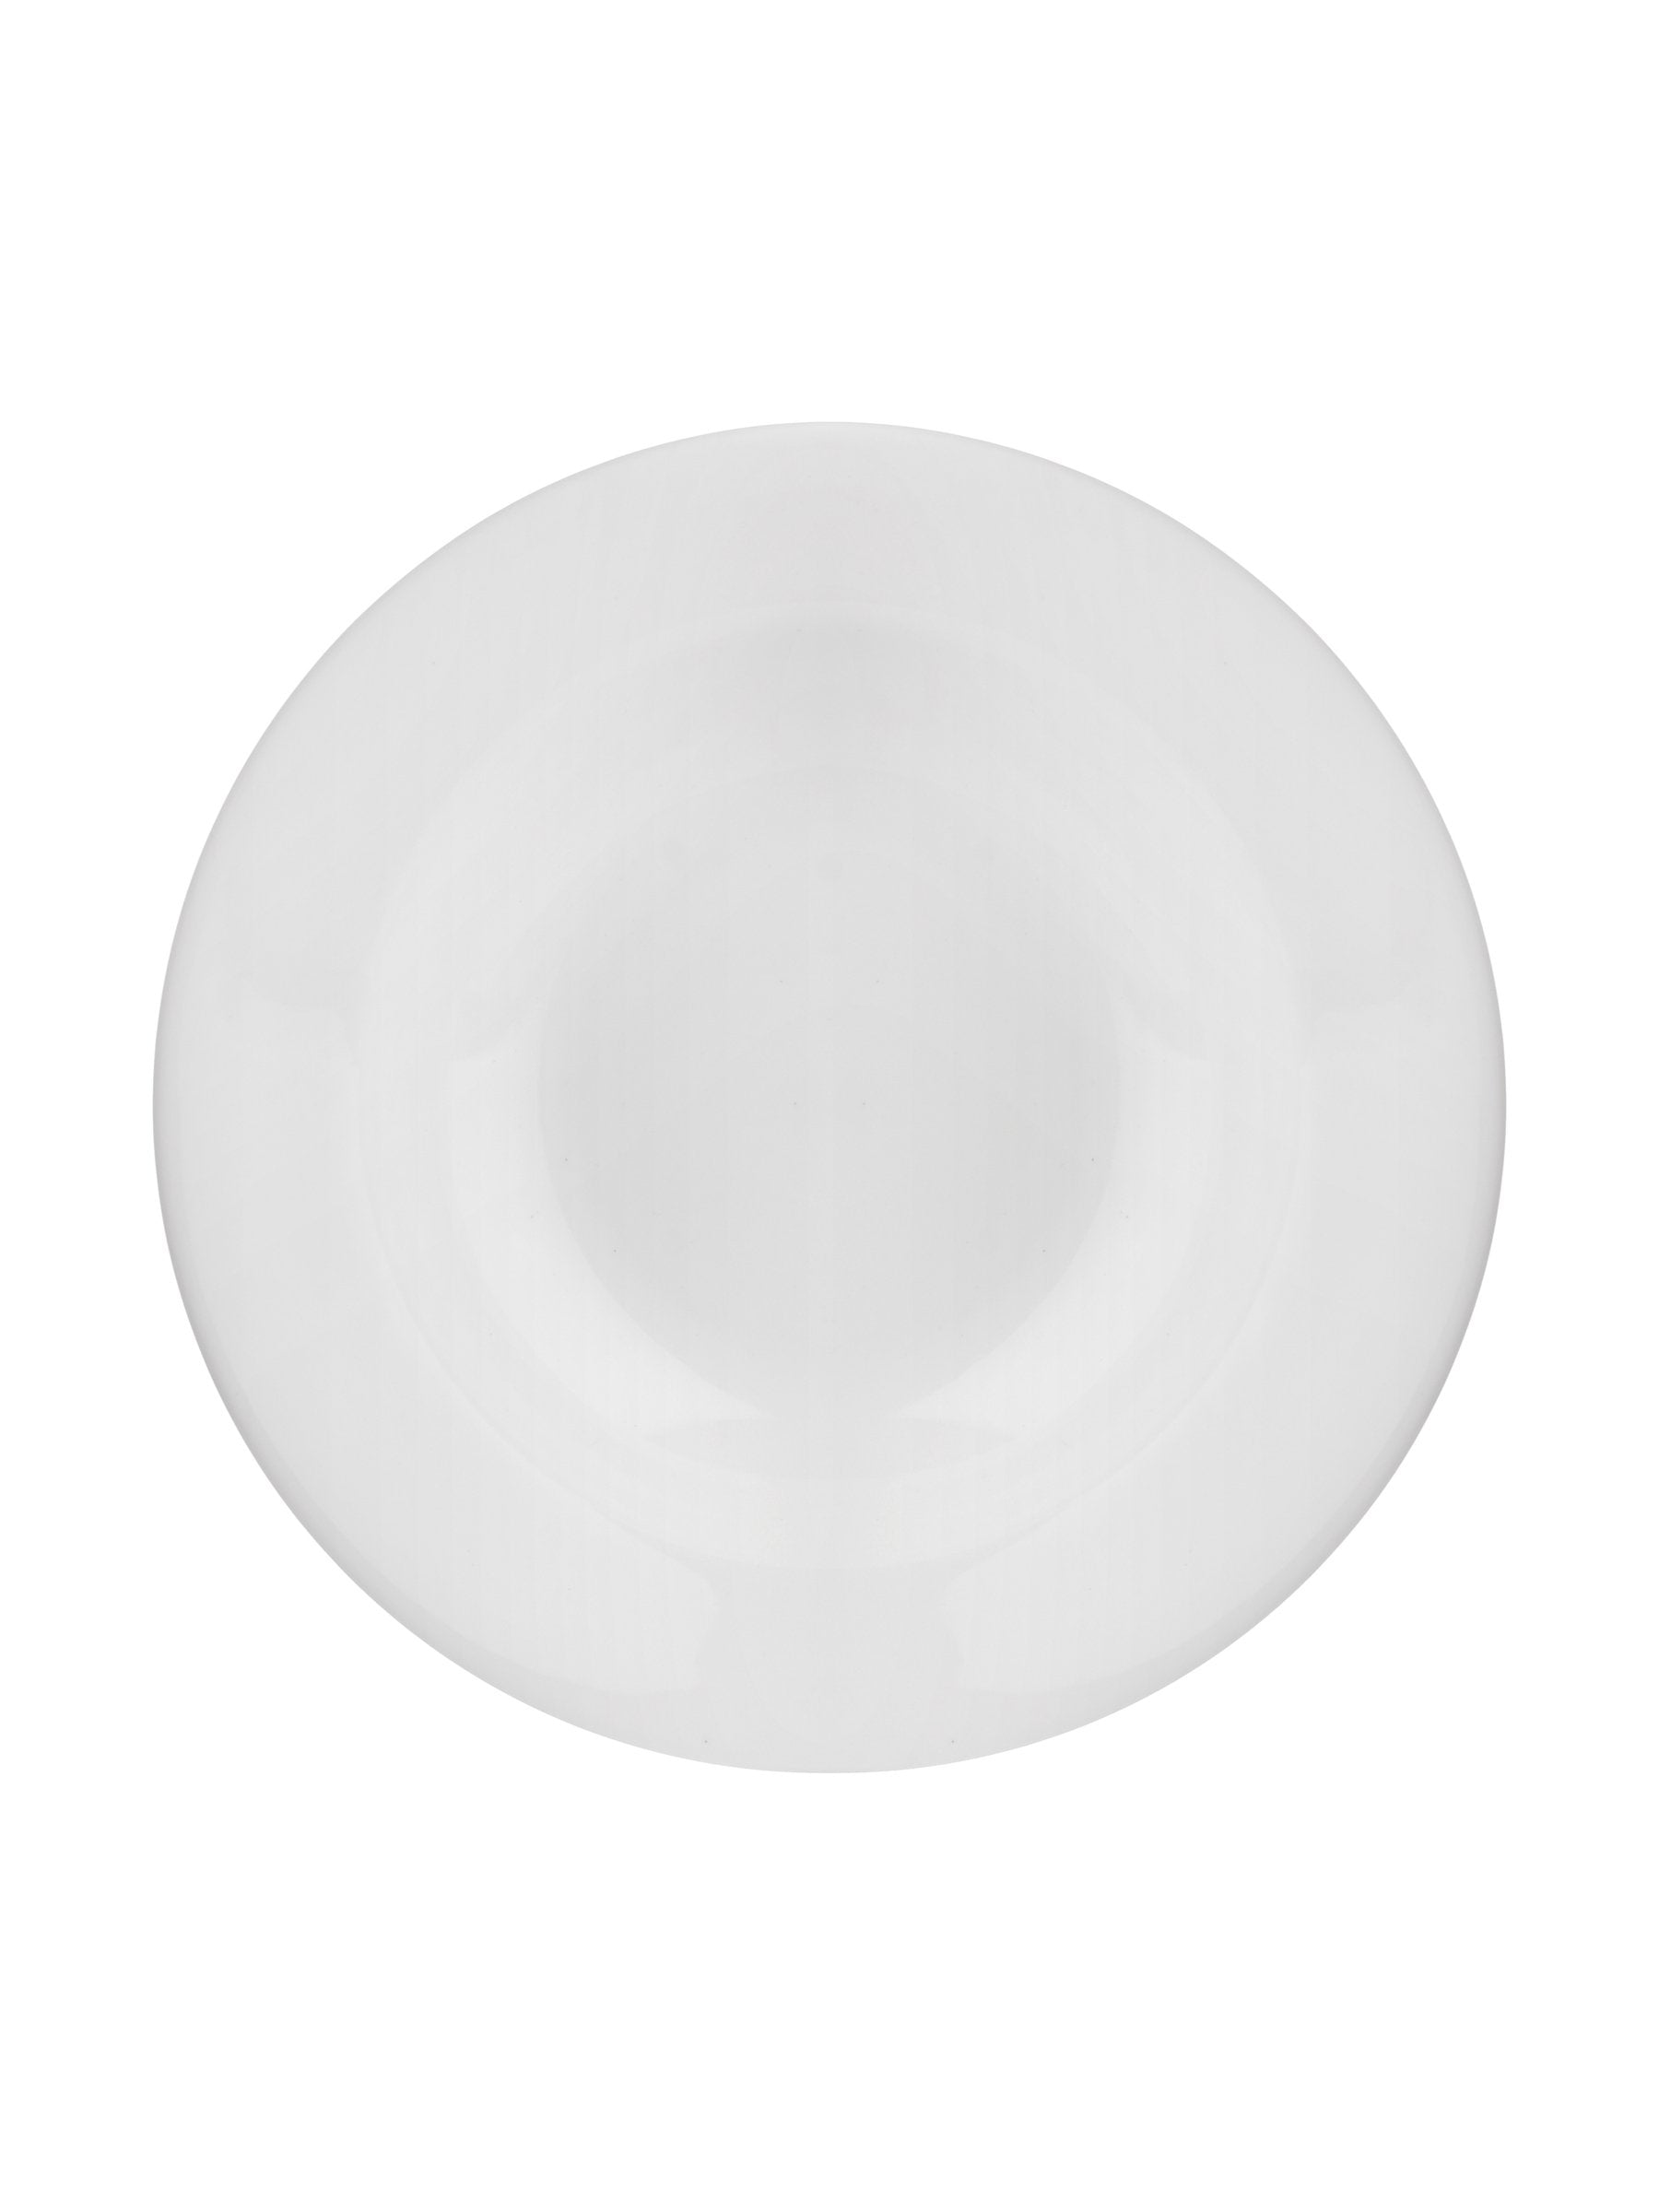 Clay Craft Basic Soup Plate 7" Set of 2 Piece Plain White - Clay Craft India